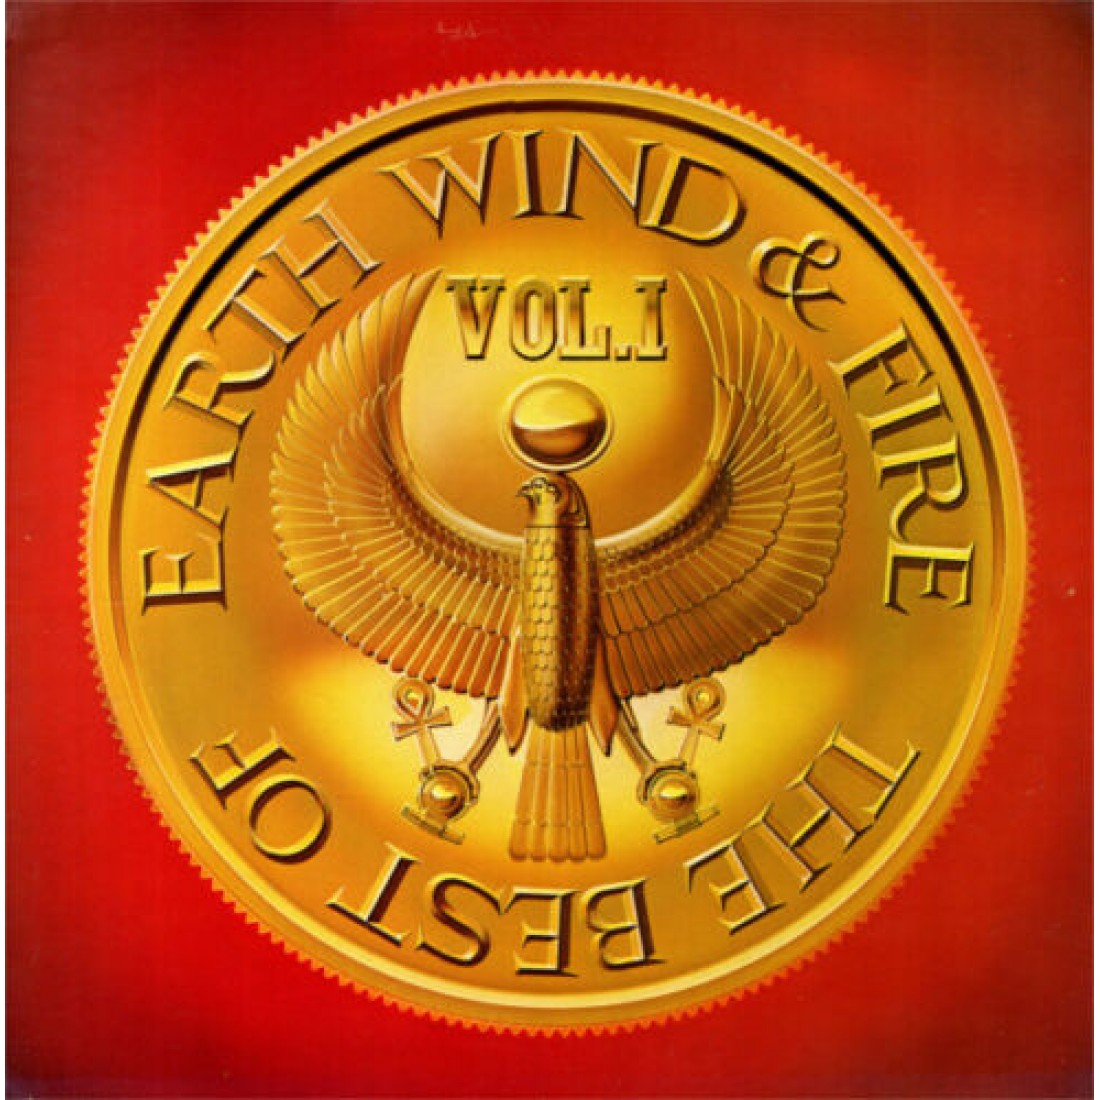 Earth wind & fire Greatest Hits Vol1 (1978) 2